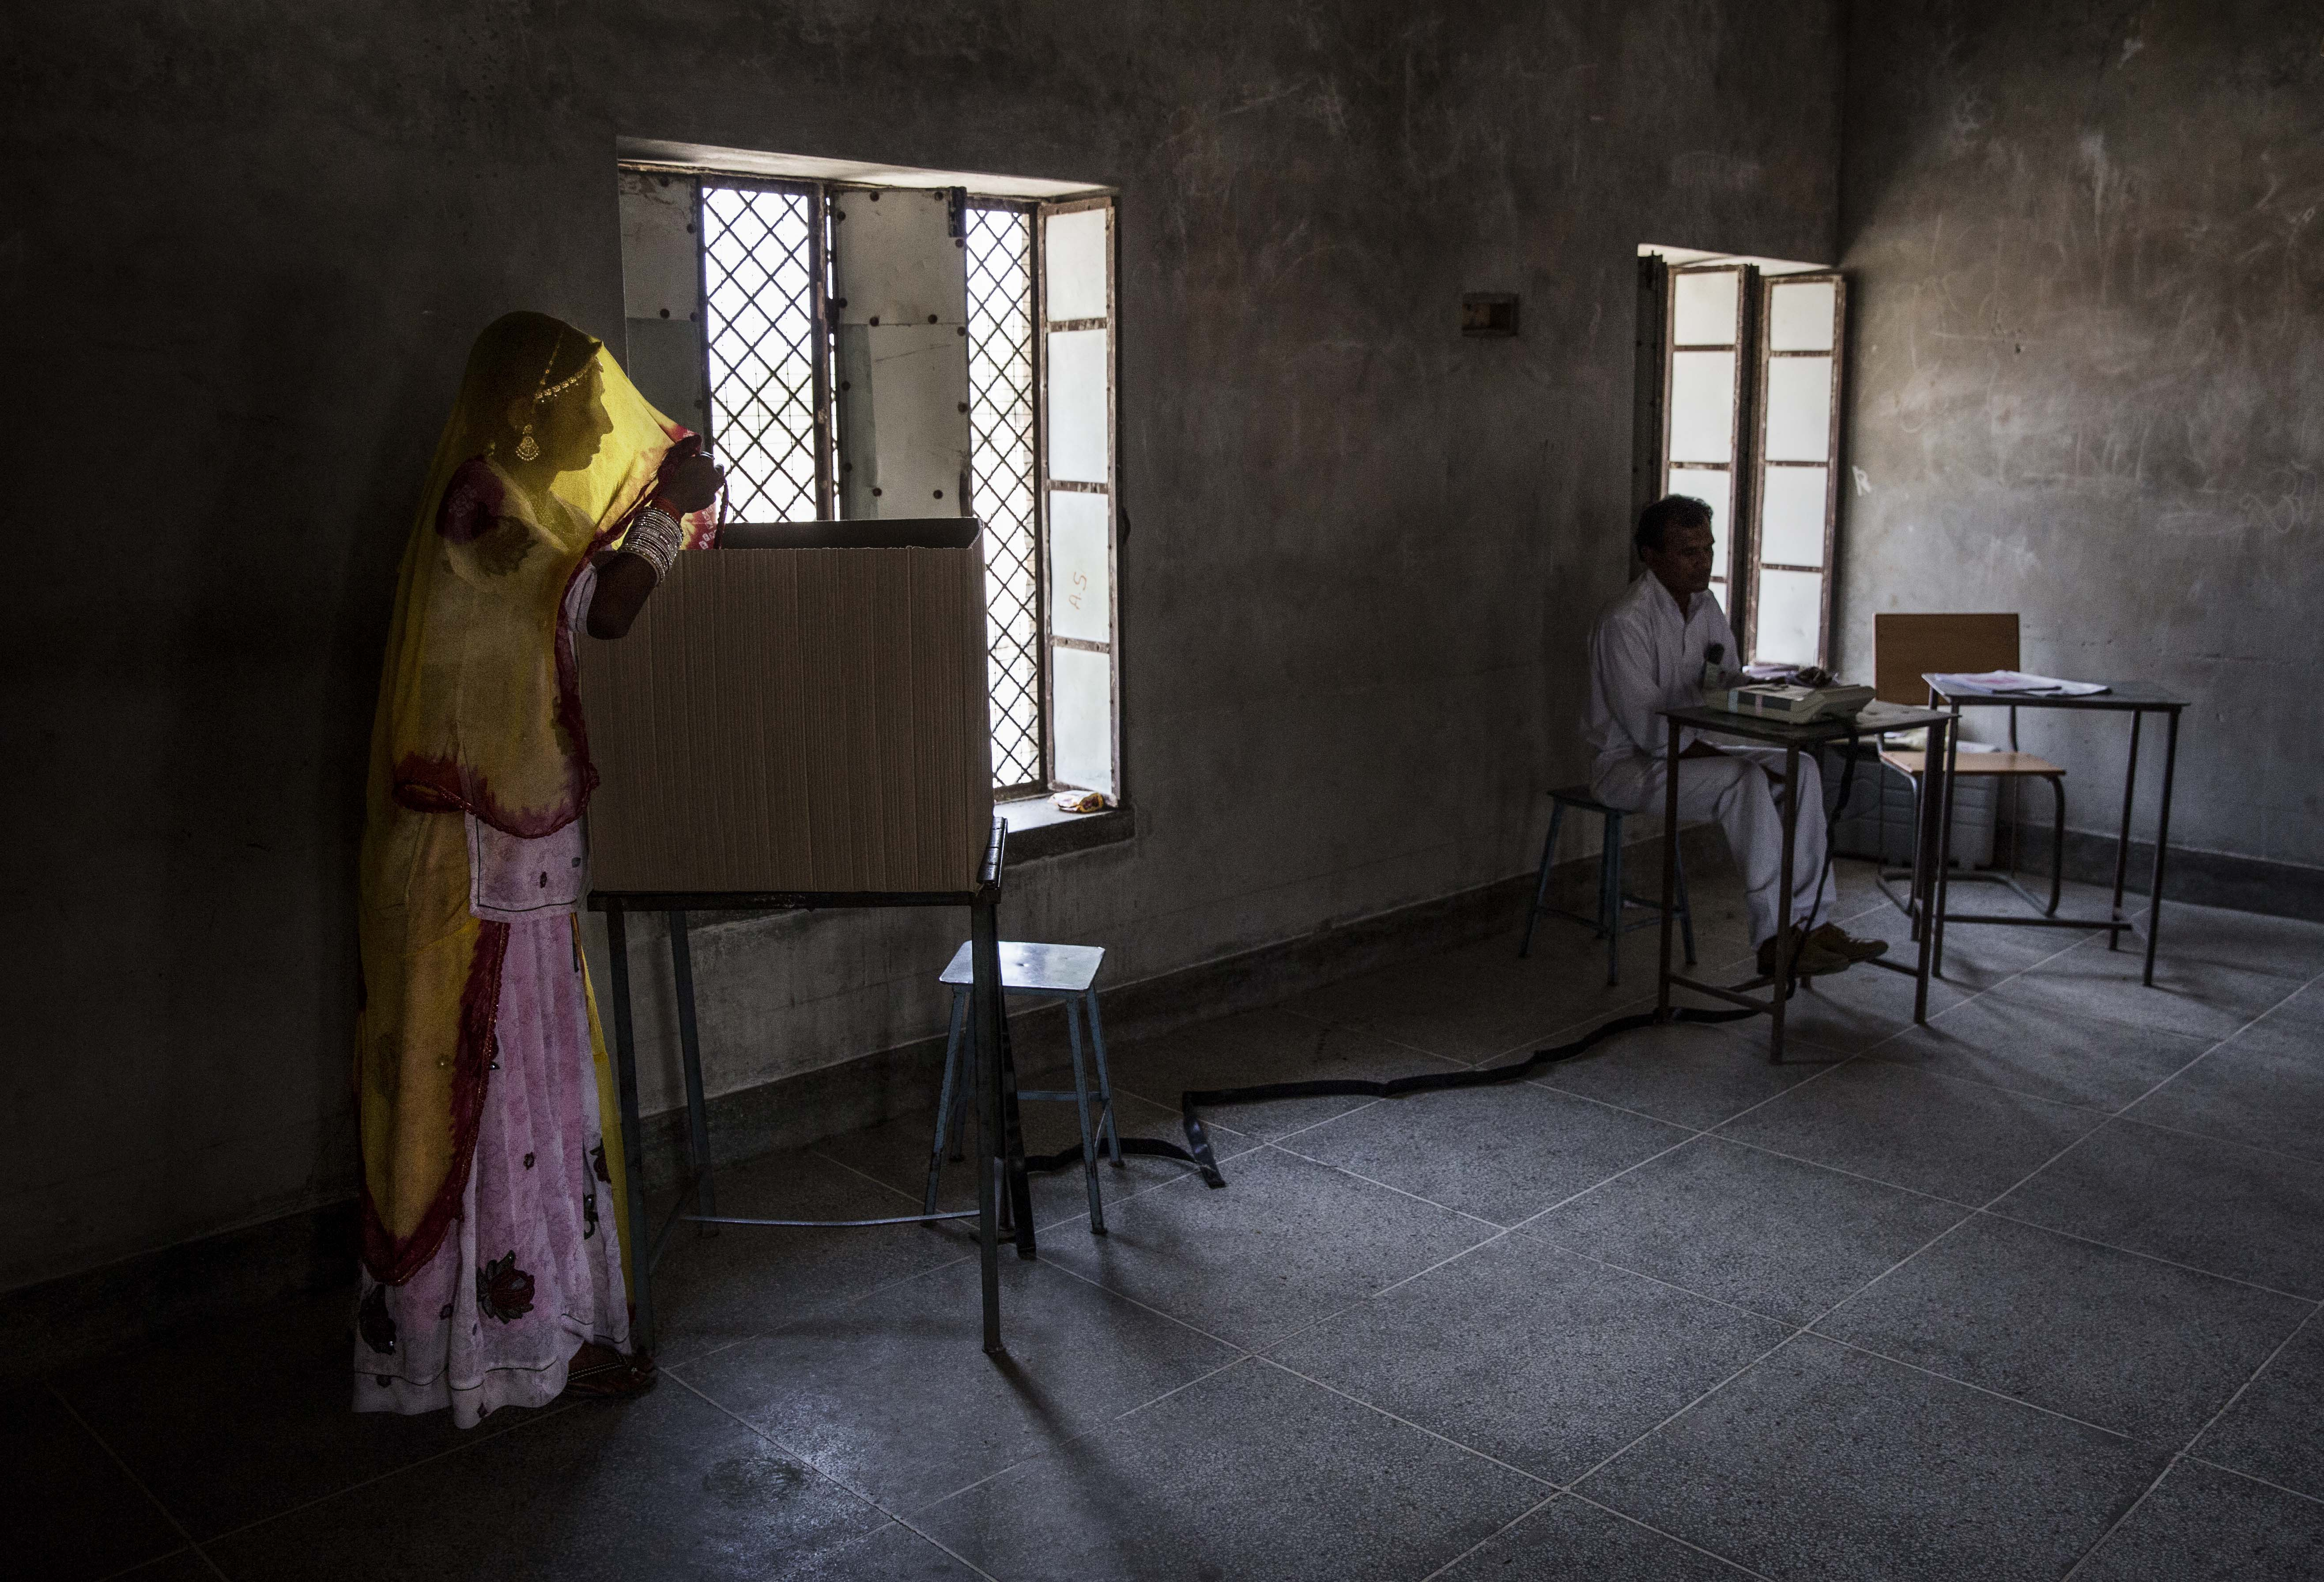 A woman casts her ballot at a polling station on April 17, 2014 in the Jodhpur District in the desert state of Rajasthan.